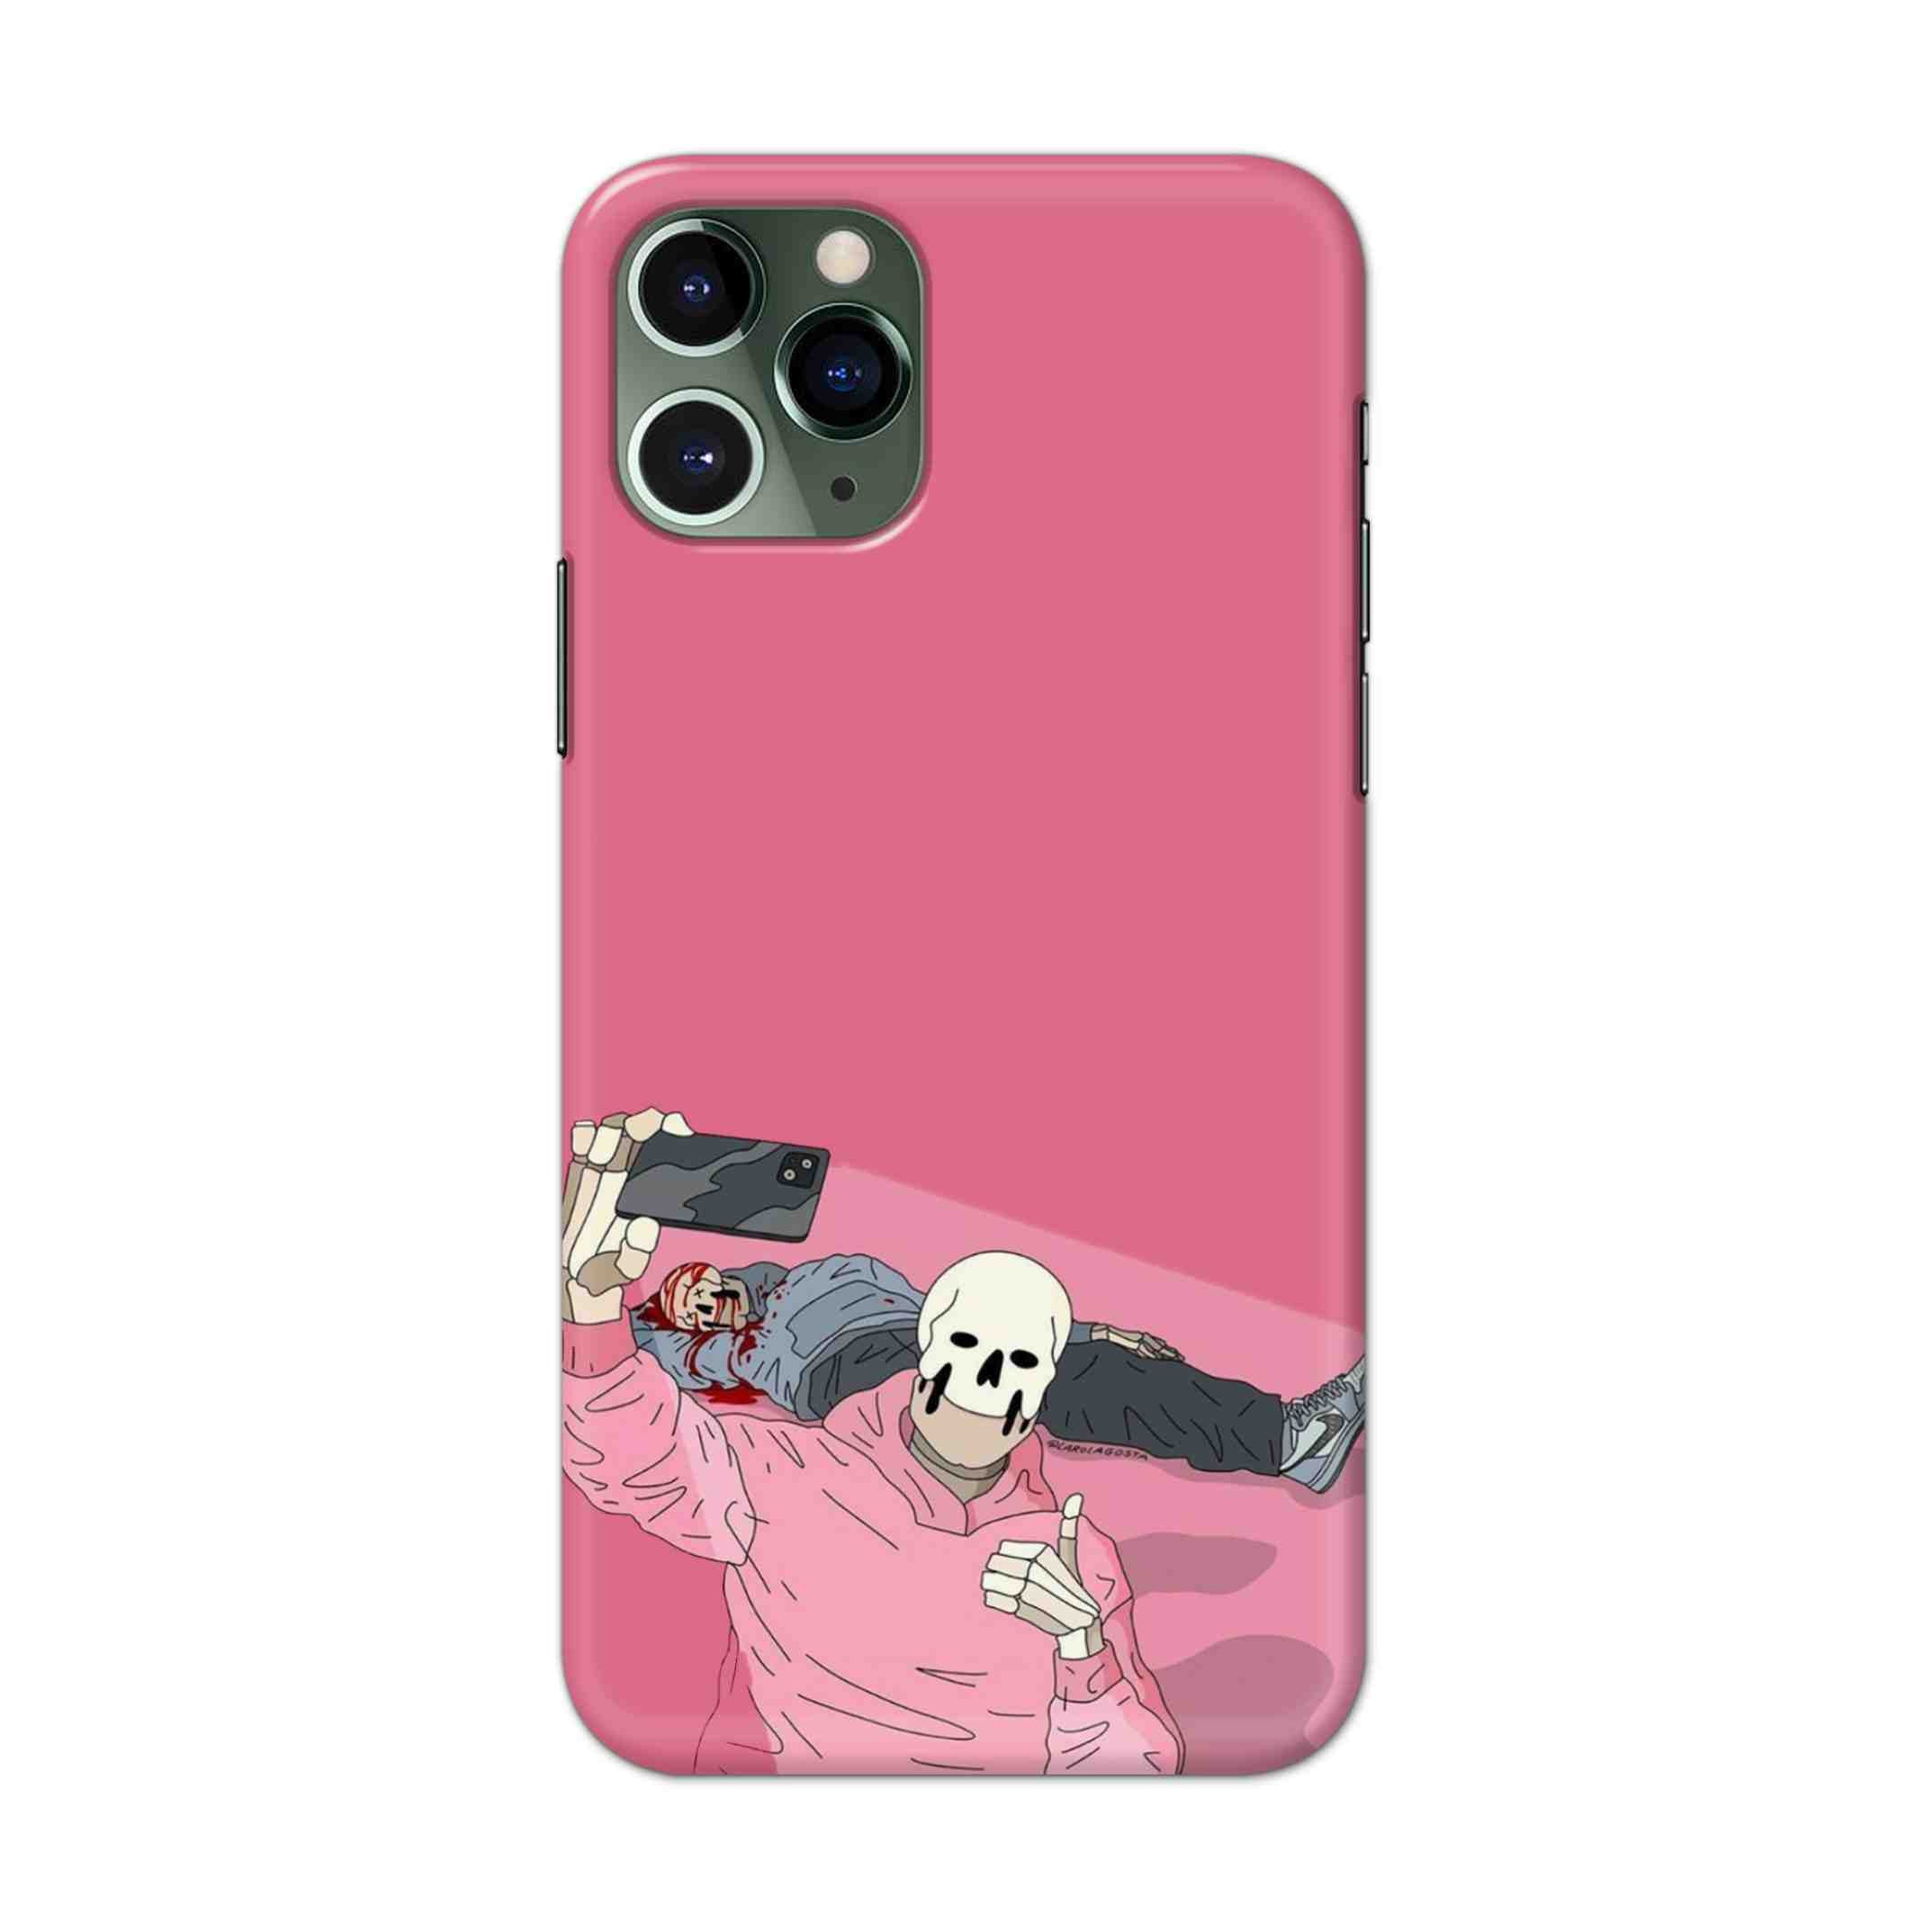 Buy Selfie Hard Back Mobile Phone Case/Cover For iPhone 11 Pro Online